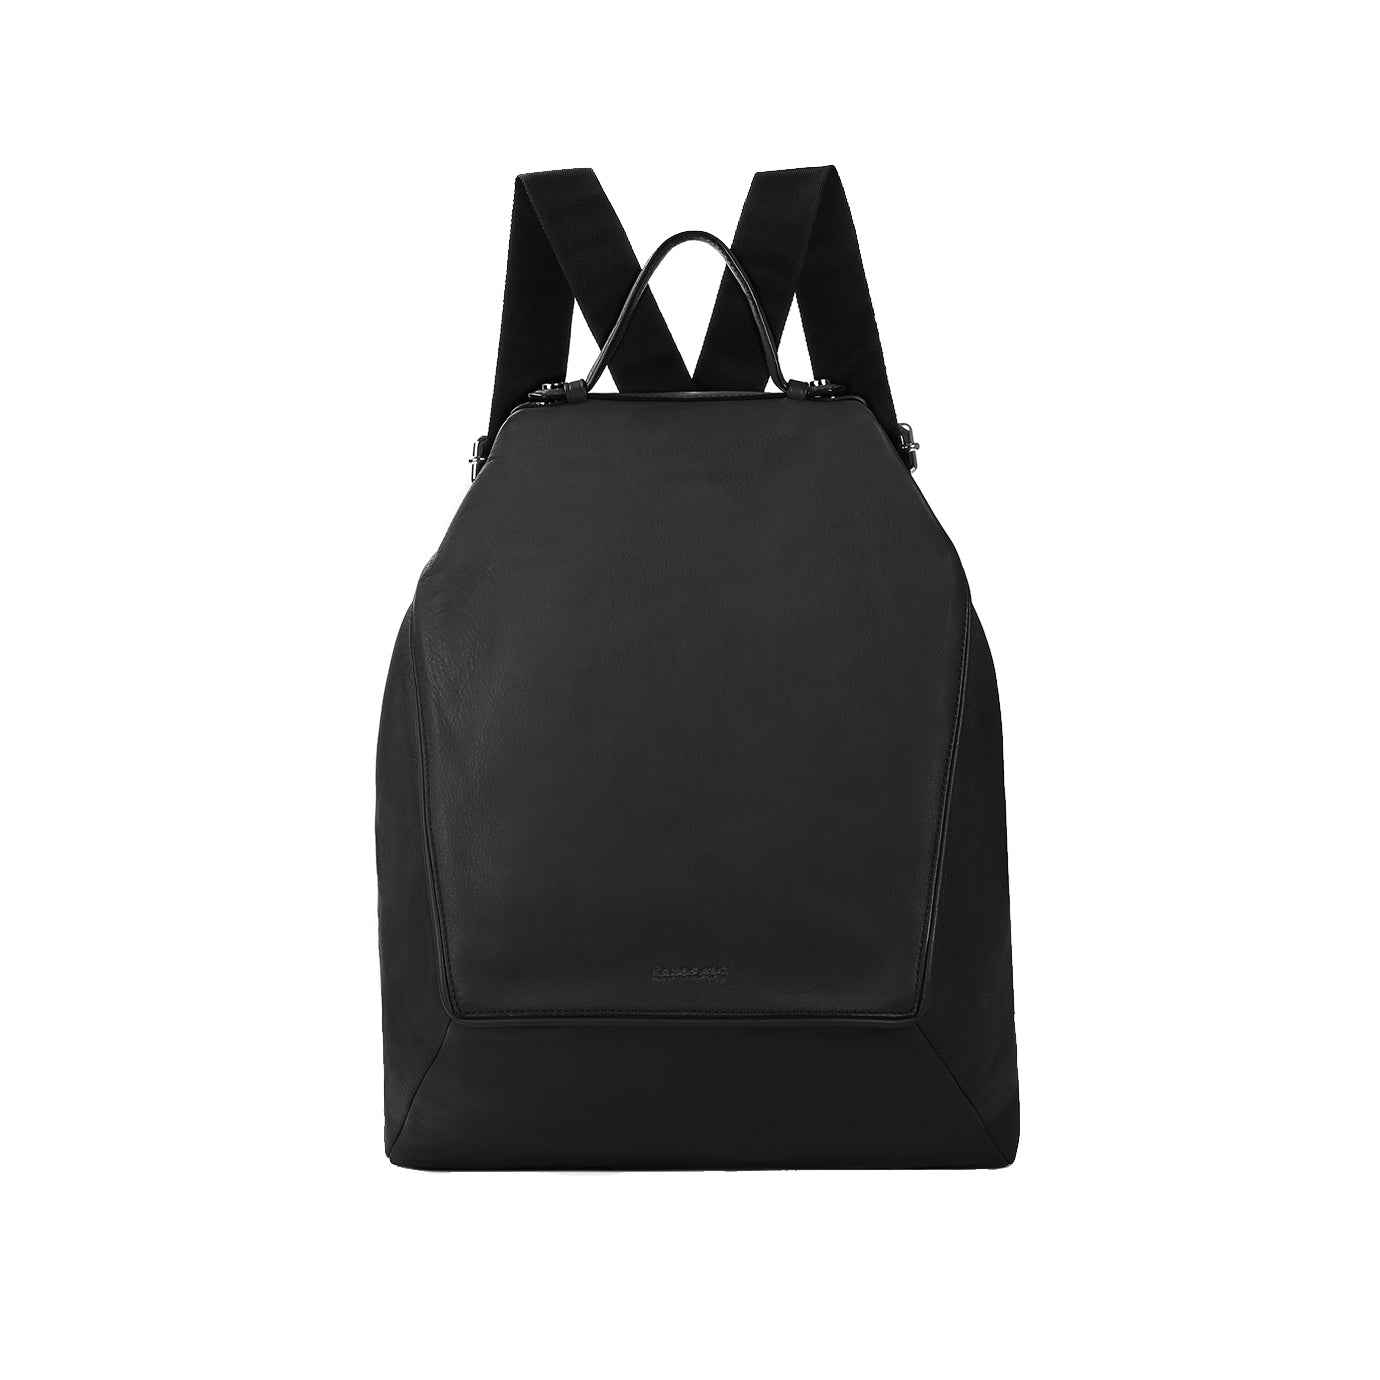 ALPS Backpack